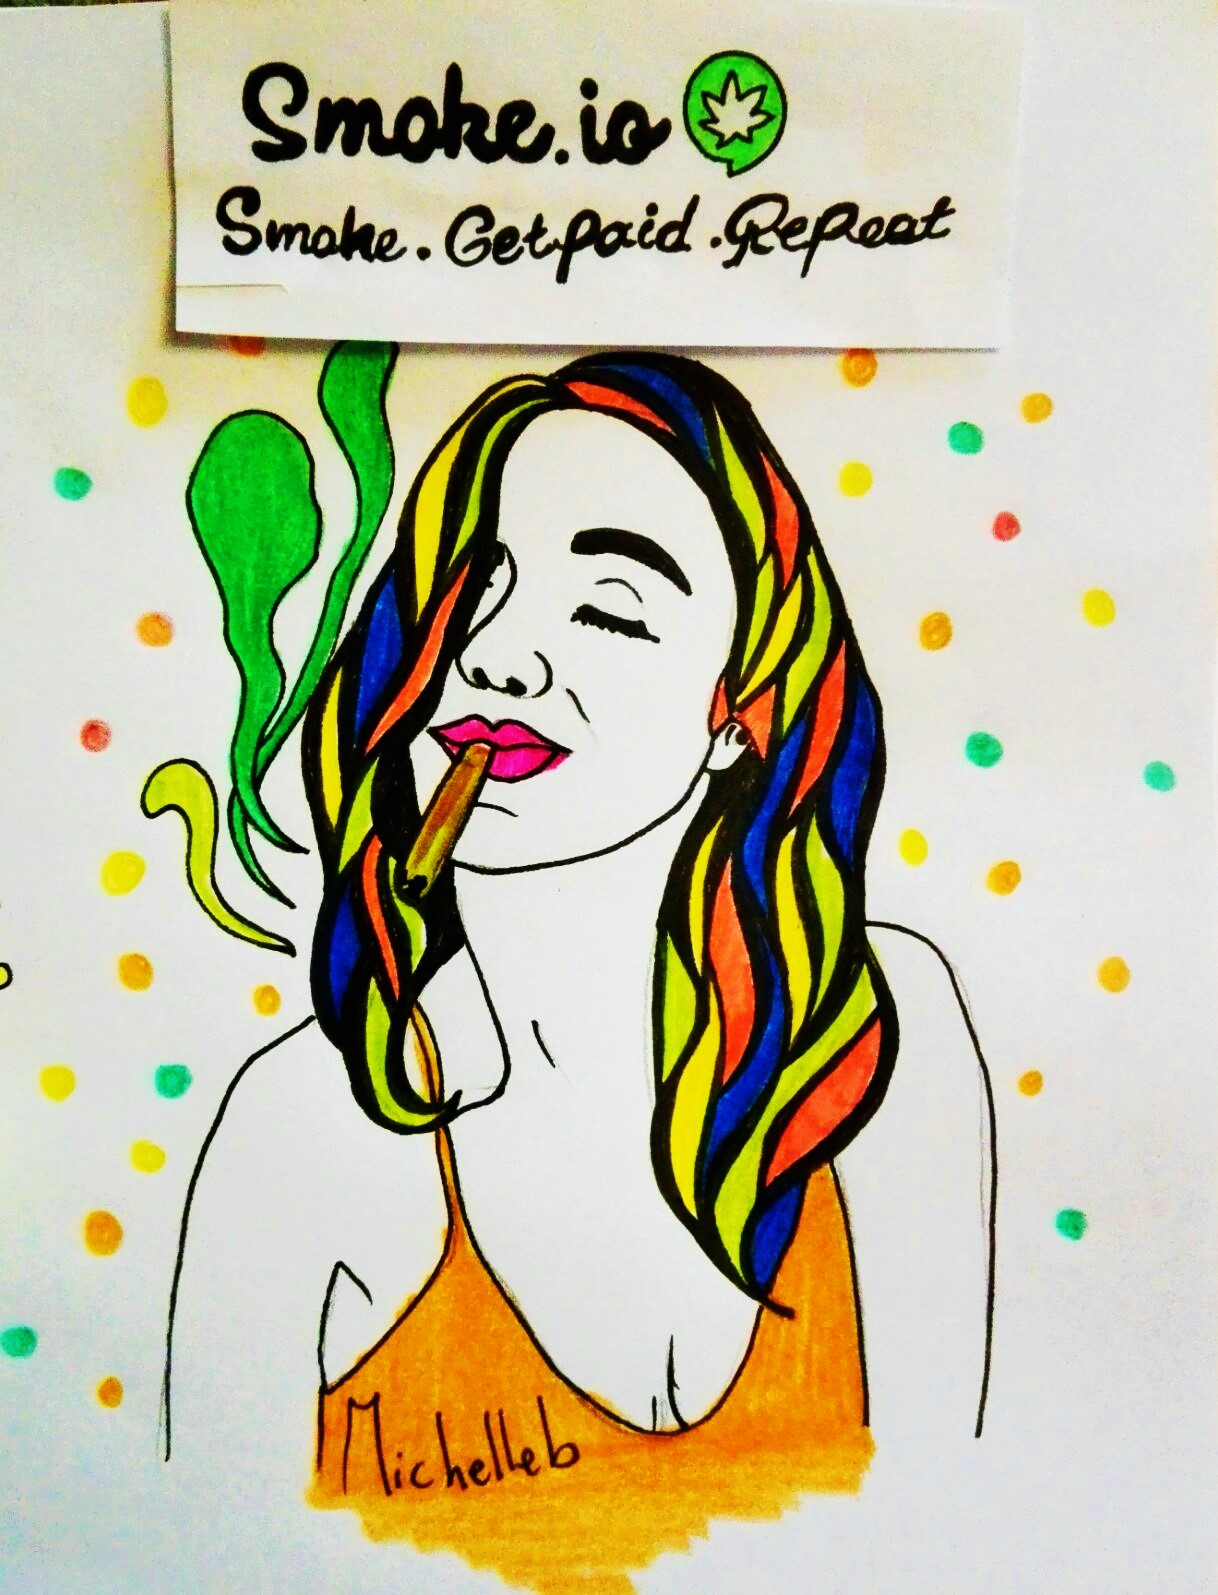 smokergirl , new illustration - Smoke Indica - A blog promoting some of